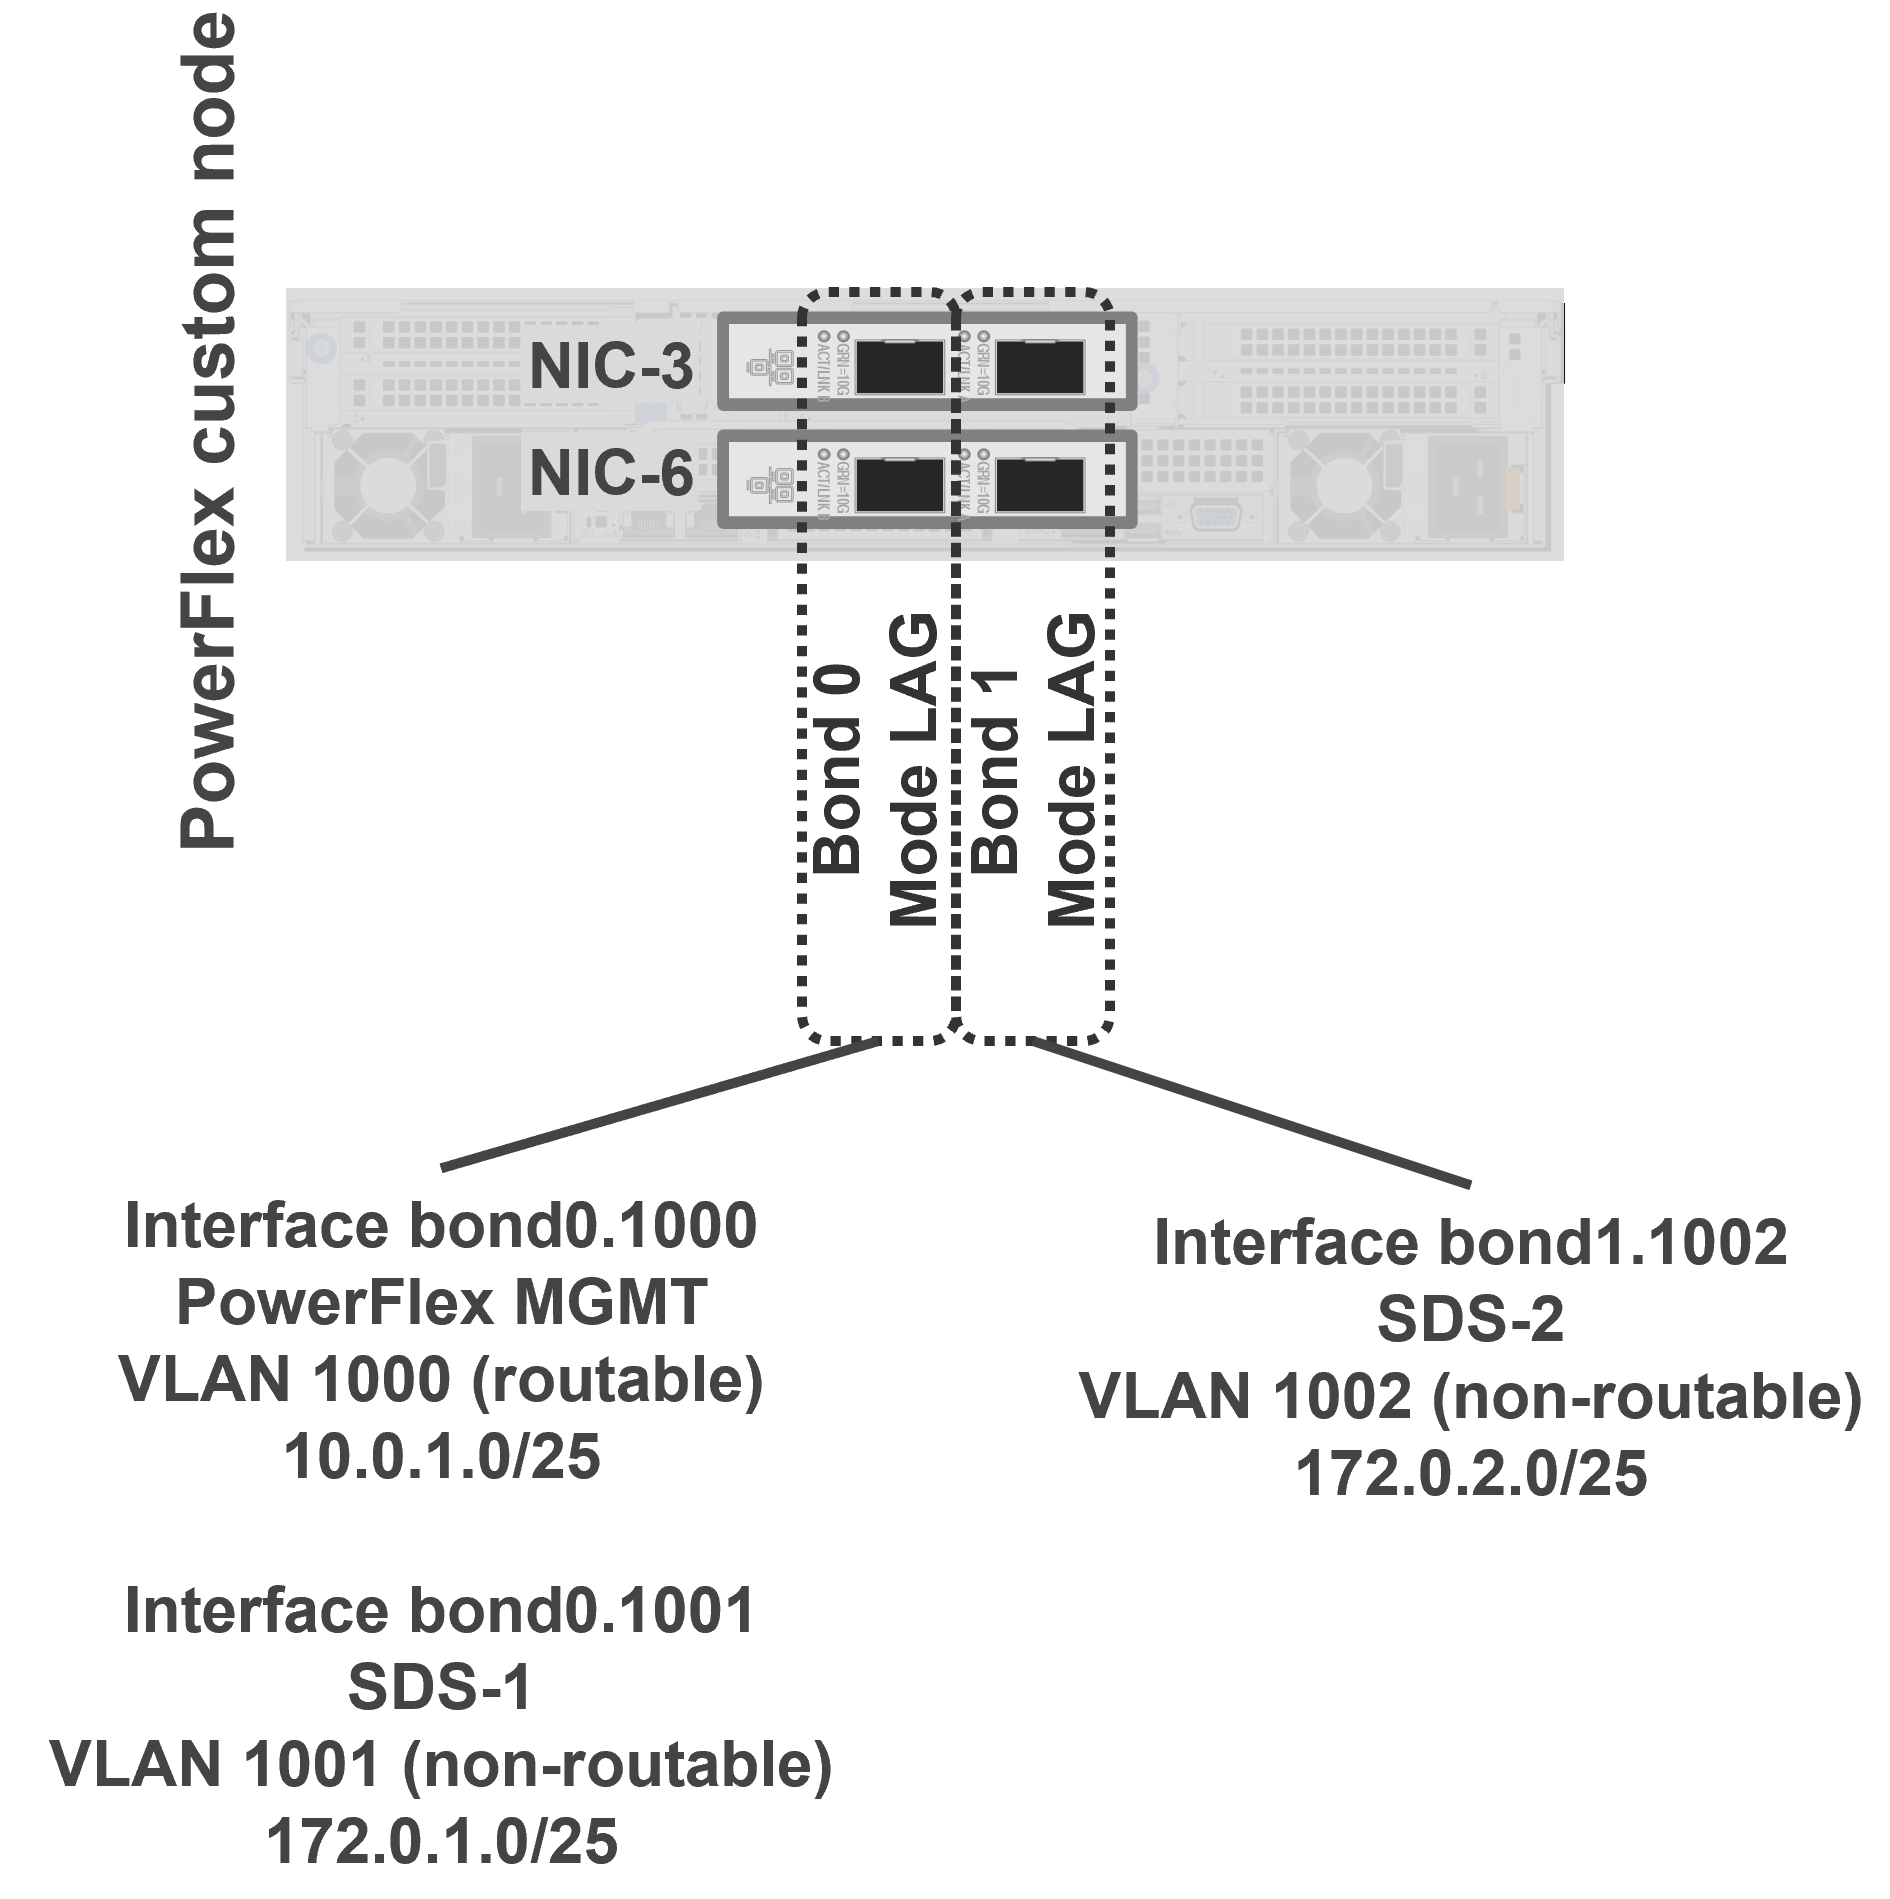 Shows the PowerFlex node host networking setup for the validation.